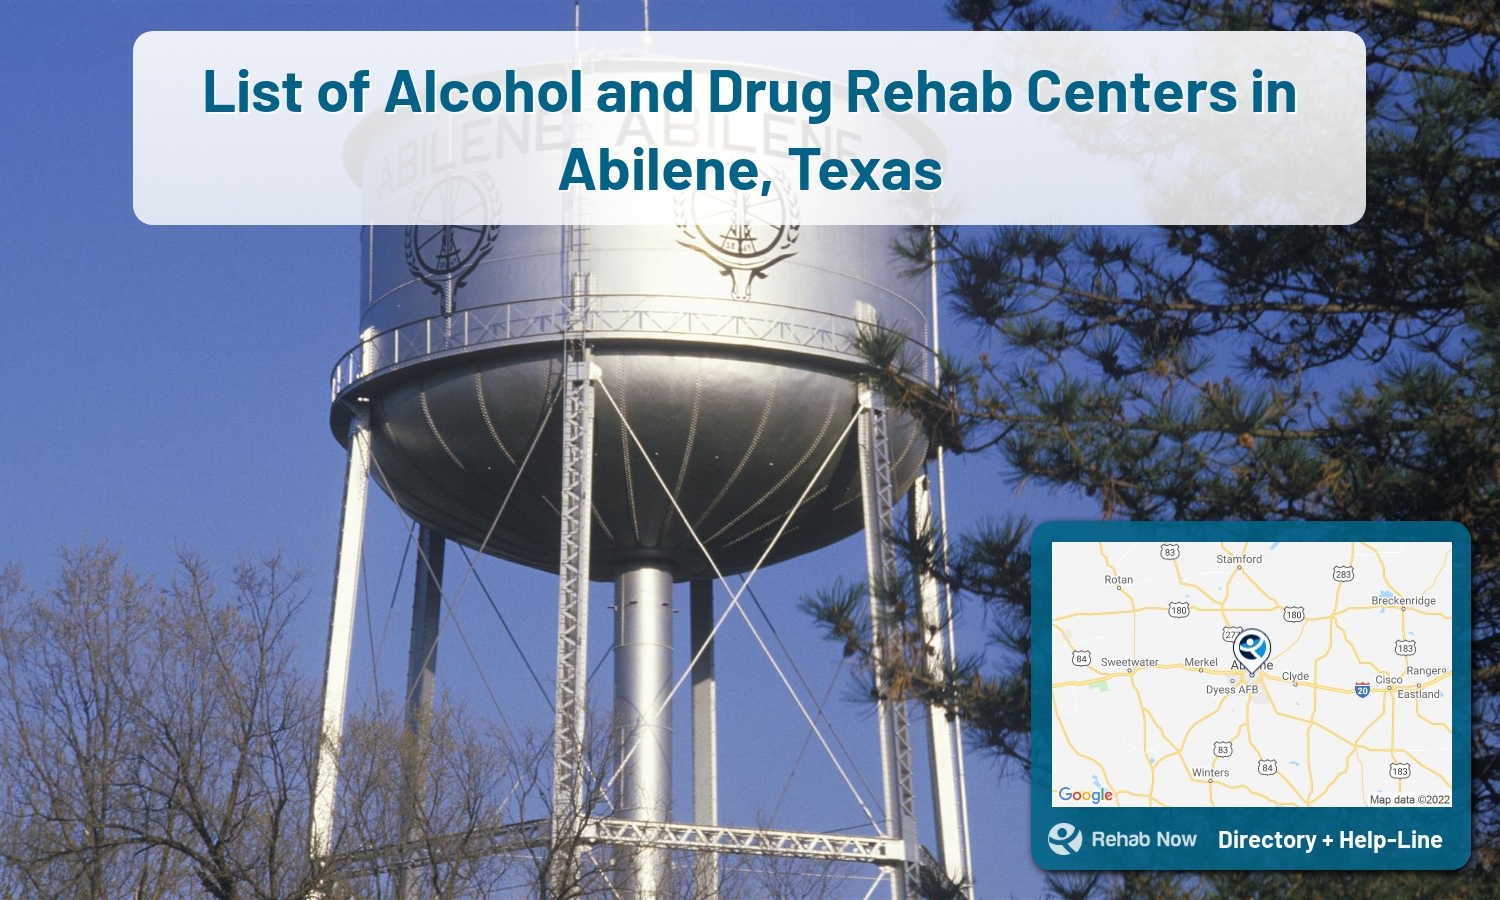 Our experts can help you find treatment now in Abilene, Texas. We list drug rehab and alcohol centers in Texas.